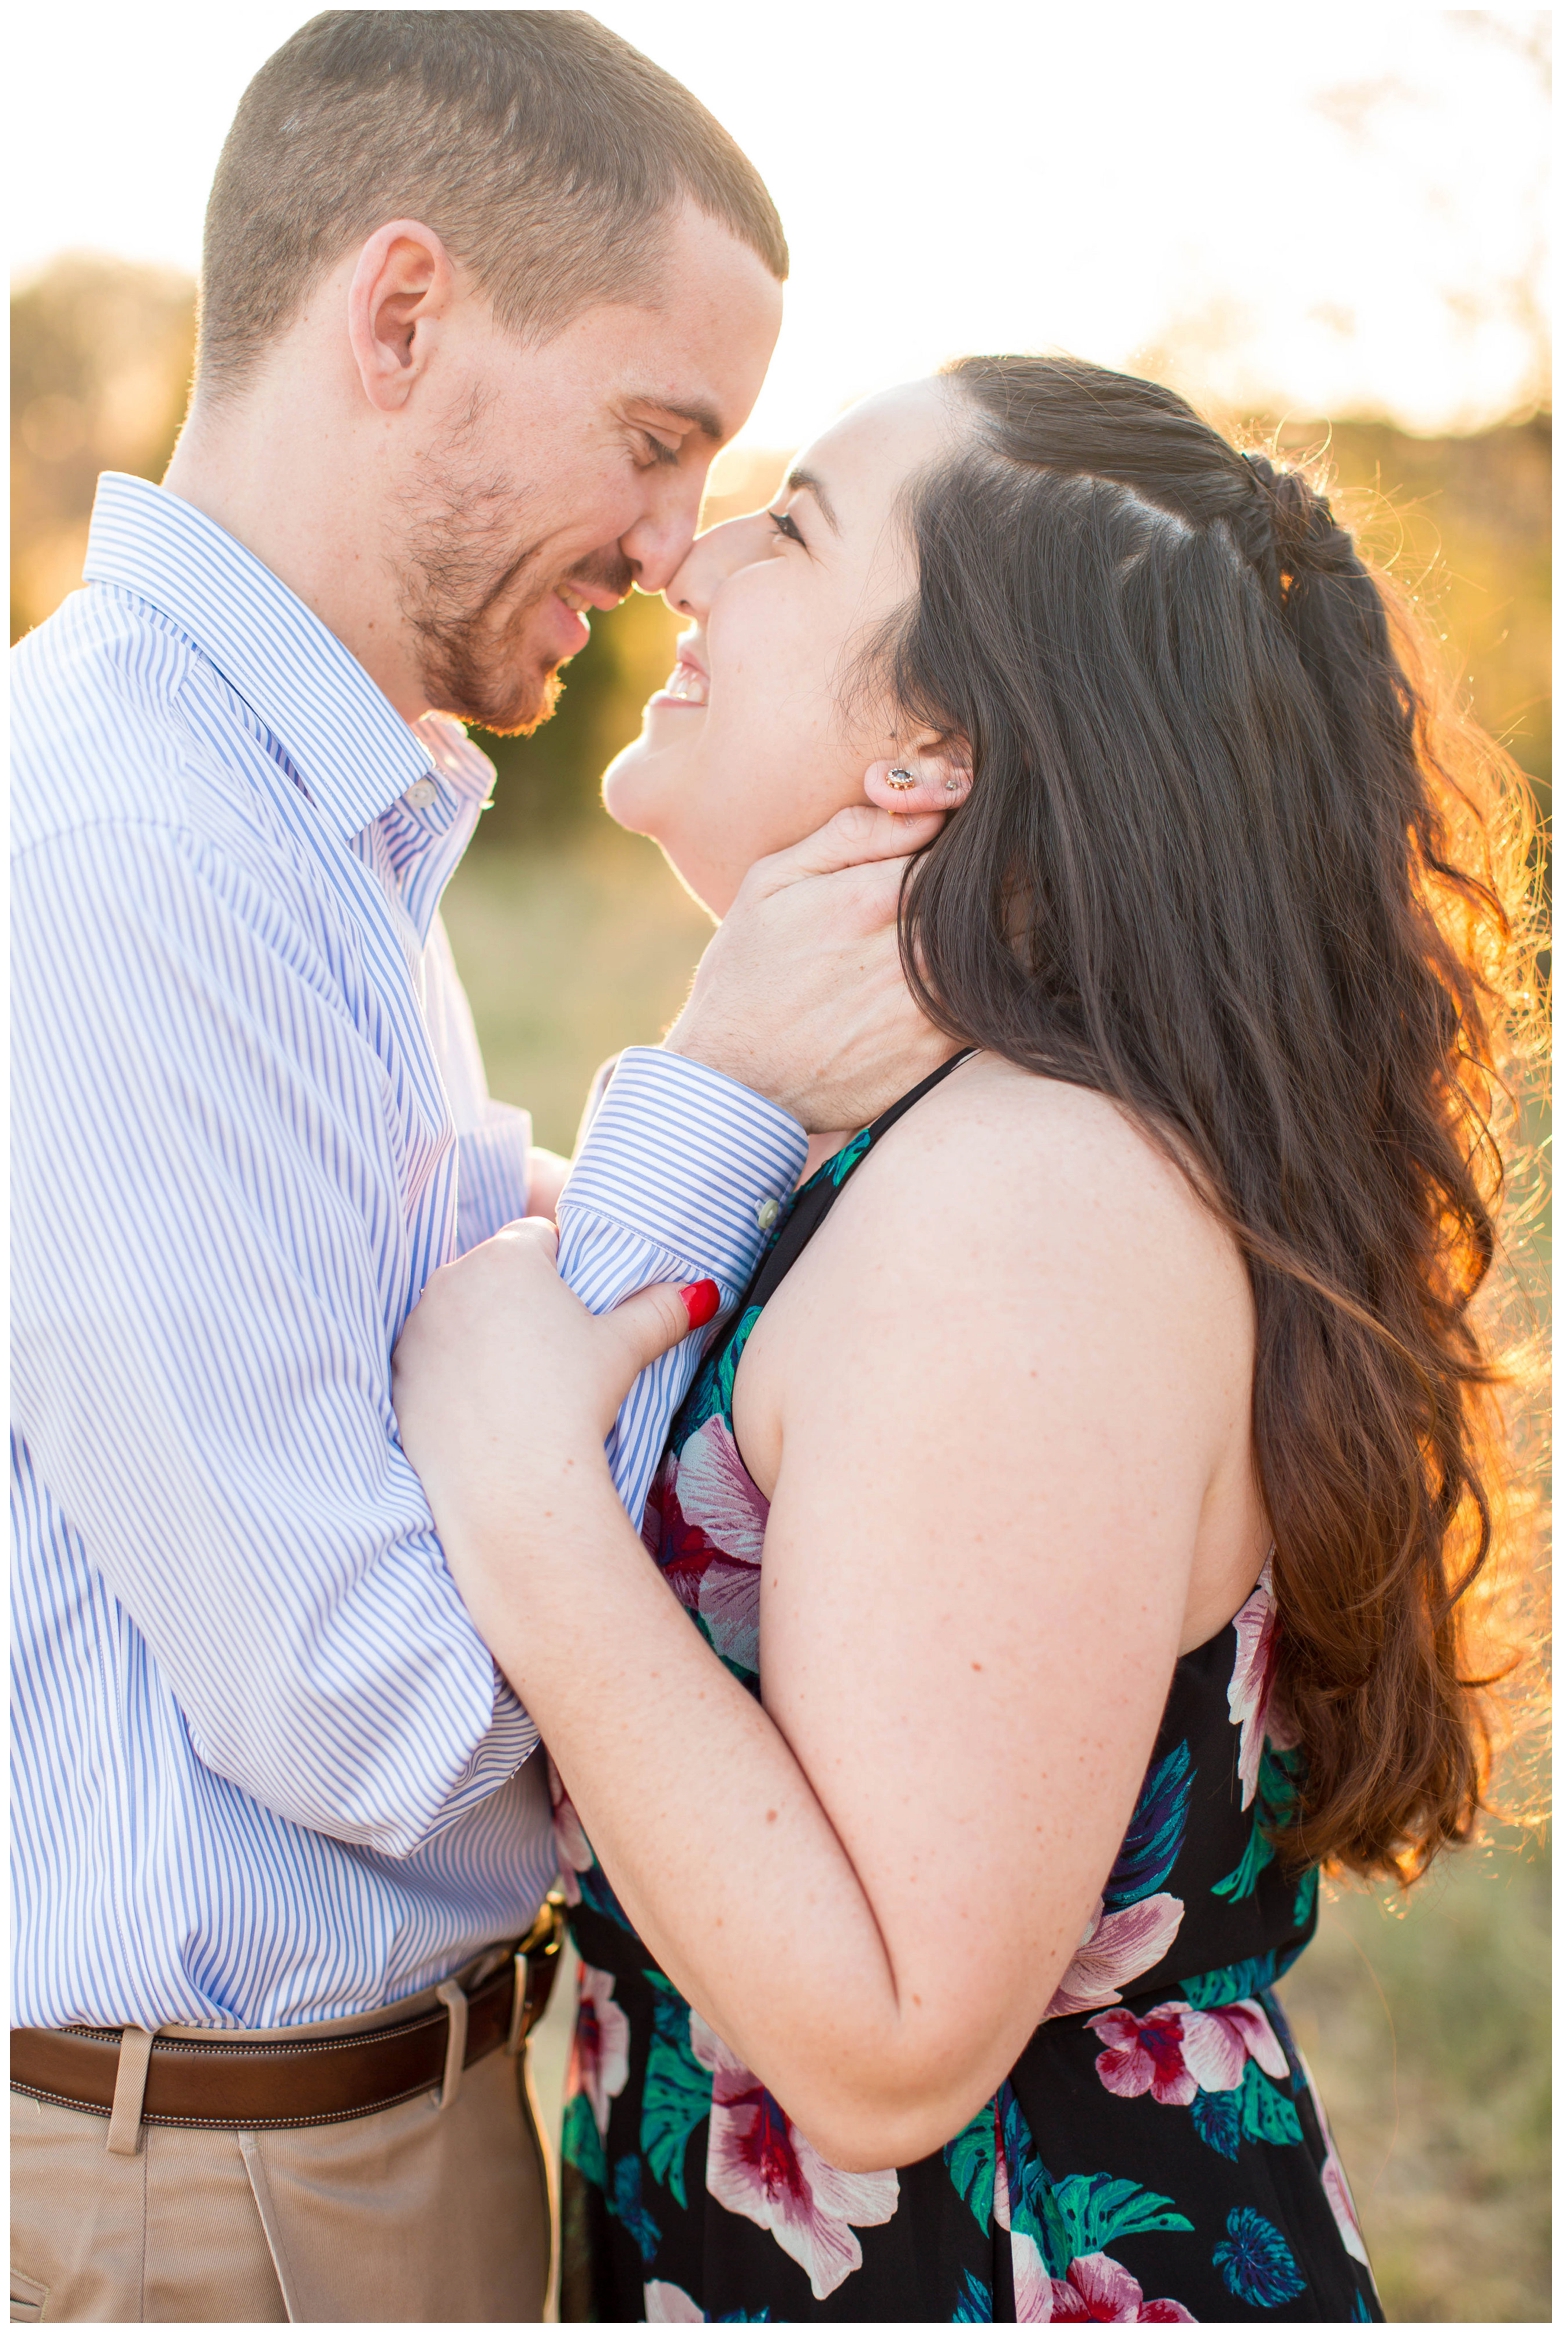 View More: http://hopetaylorphotographyphotos.pass.us/allysa-and-nathan-engagement